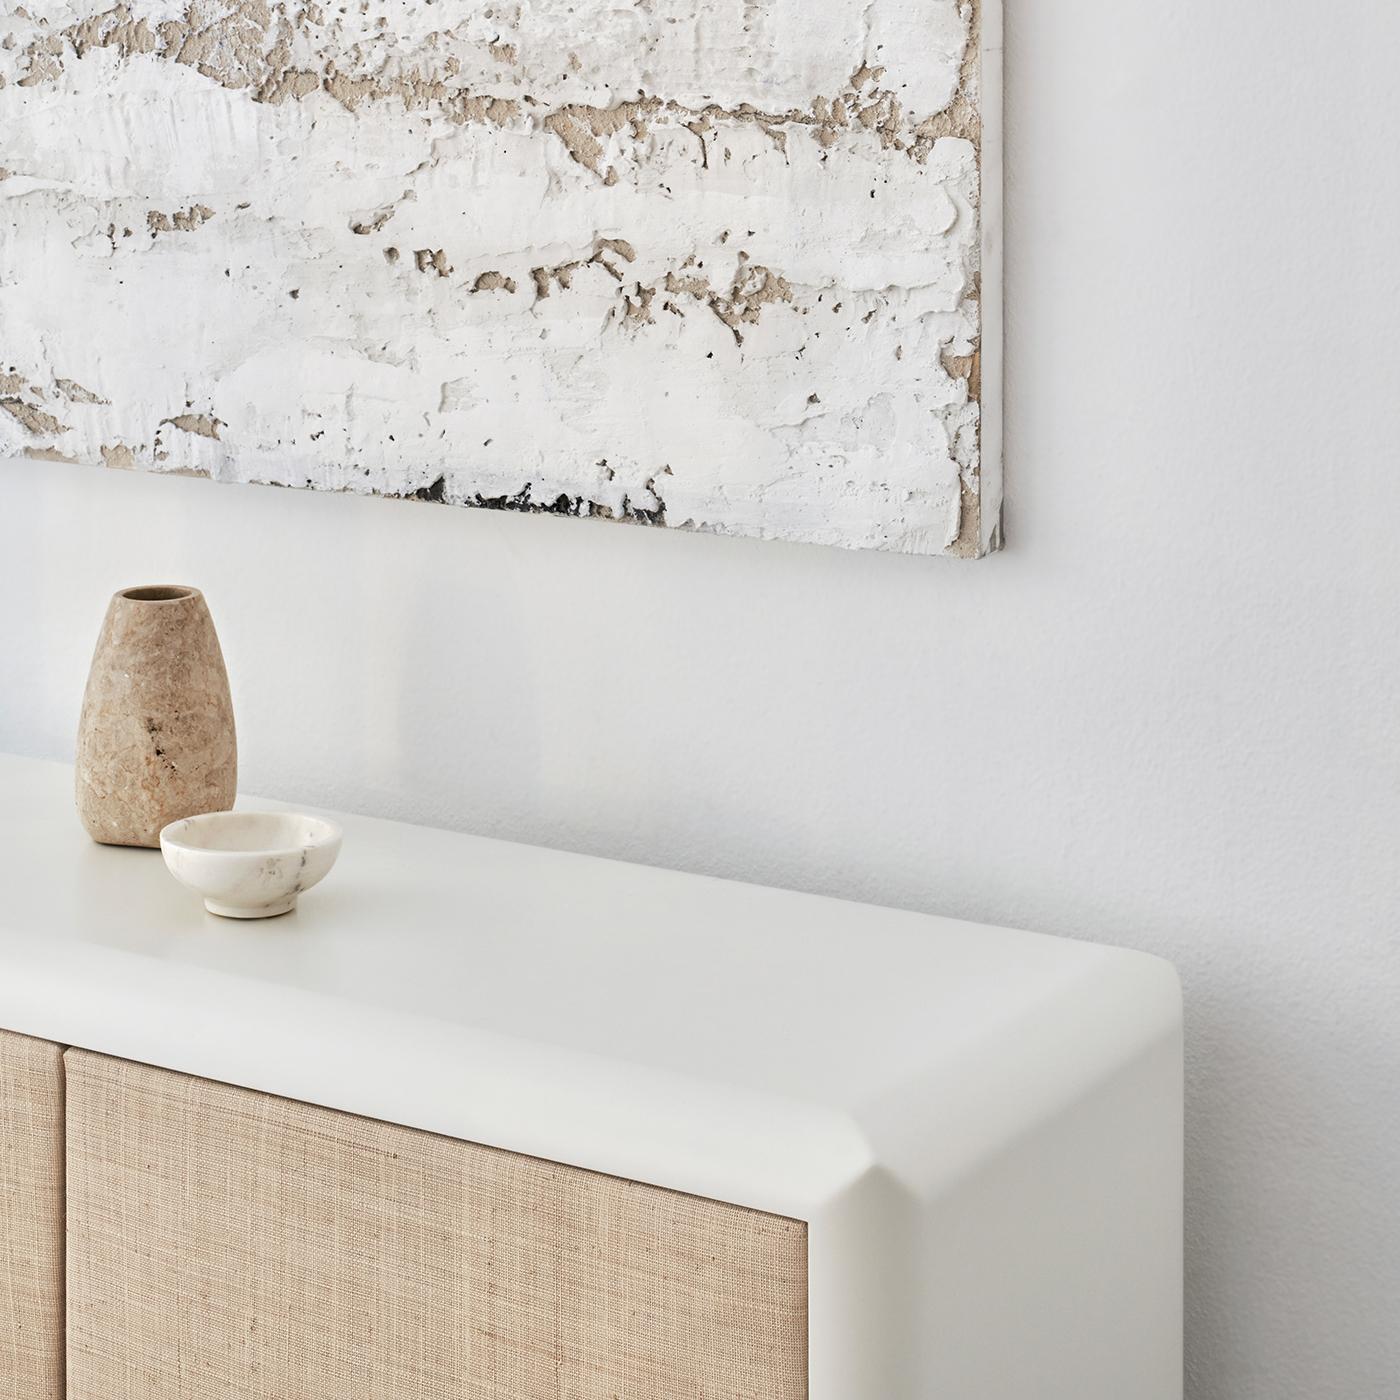 Clean refinement and essential minimalism define this gorgeous sideboard, boasting a simple and compact shape comprised of four doors. Crafted of white lacquered wood, it will make a versatile and timeless addition to modern decor.